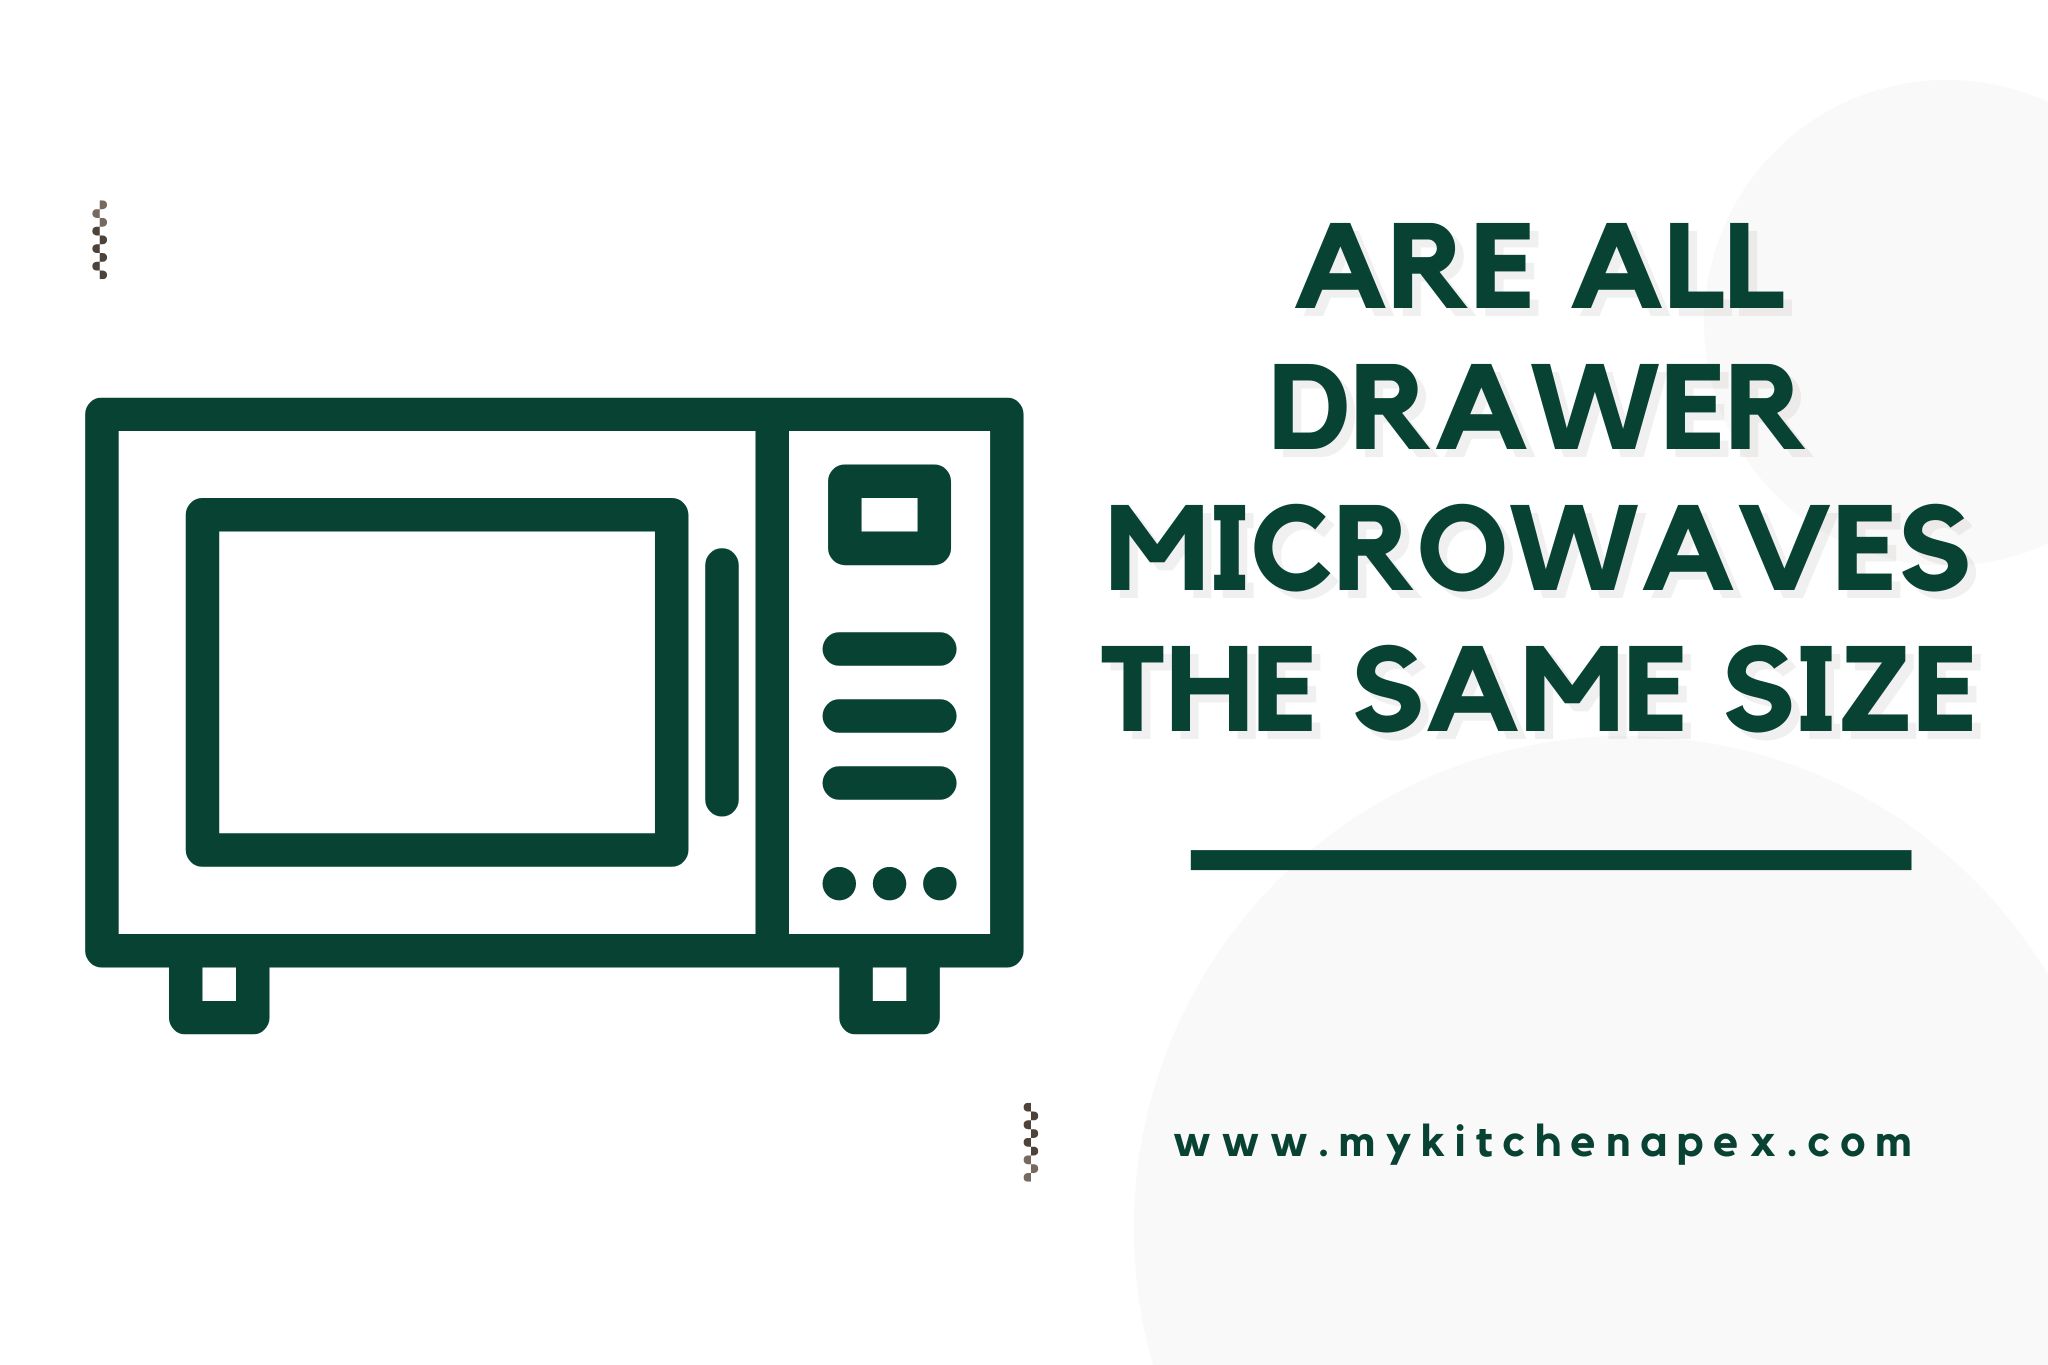 are all drawer microwaves the same size